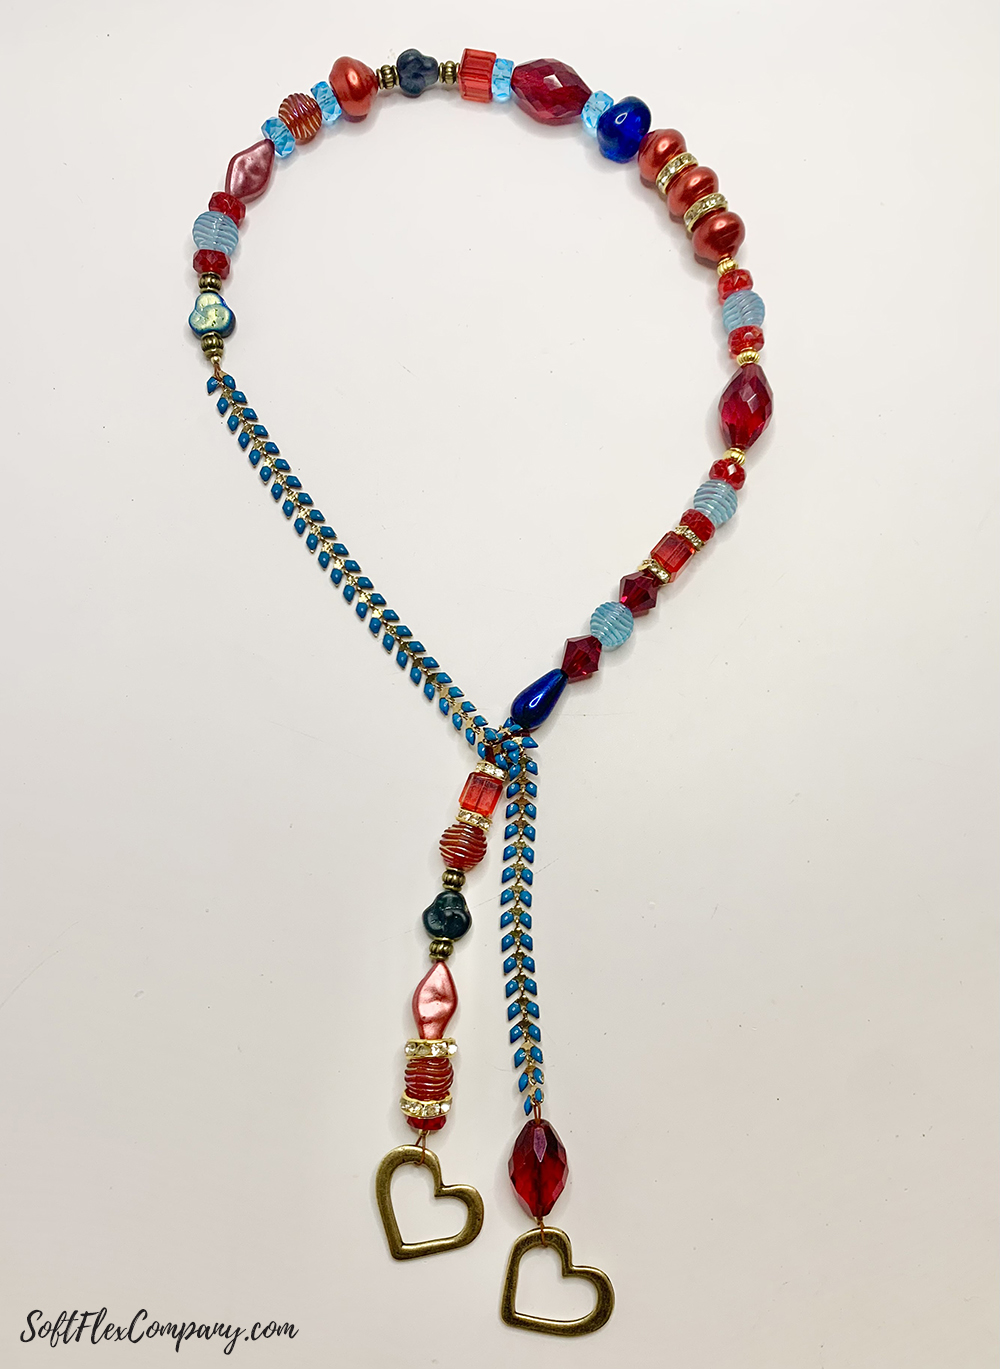 Lariat Necklace With Pantone Colors And A Heart Pendant by Sara Oehler